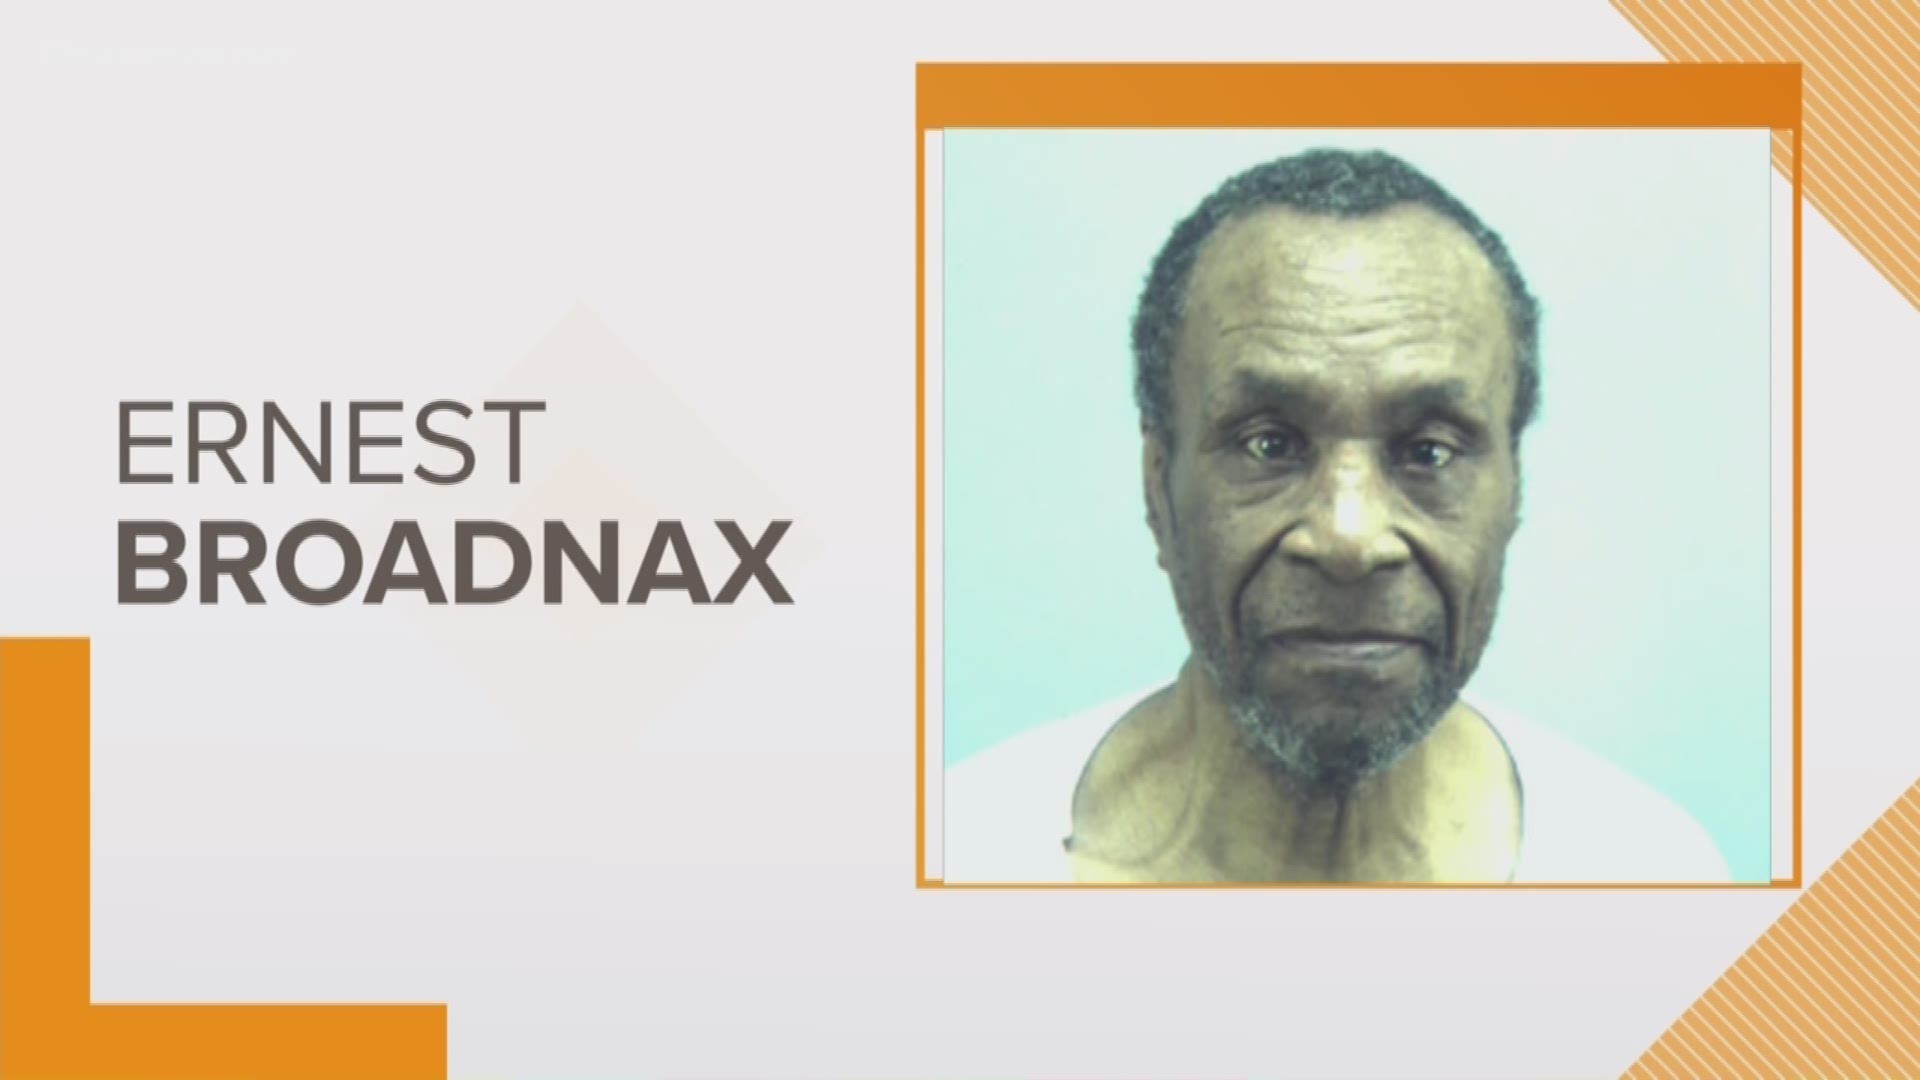 A man accused in connection with a decade-old cold case is in Virginia Beach.